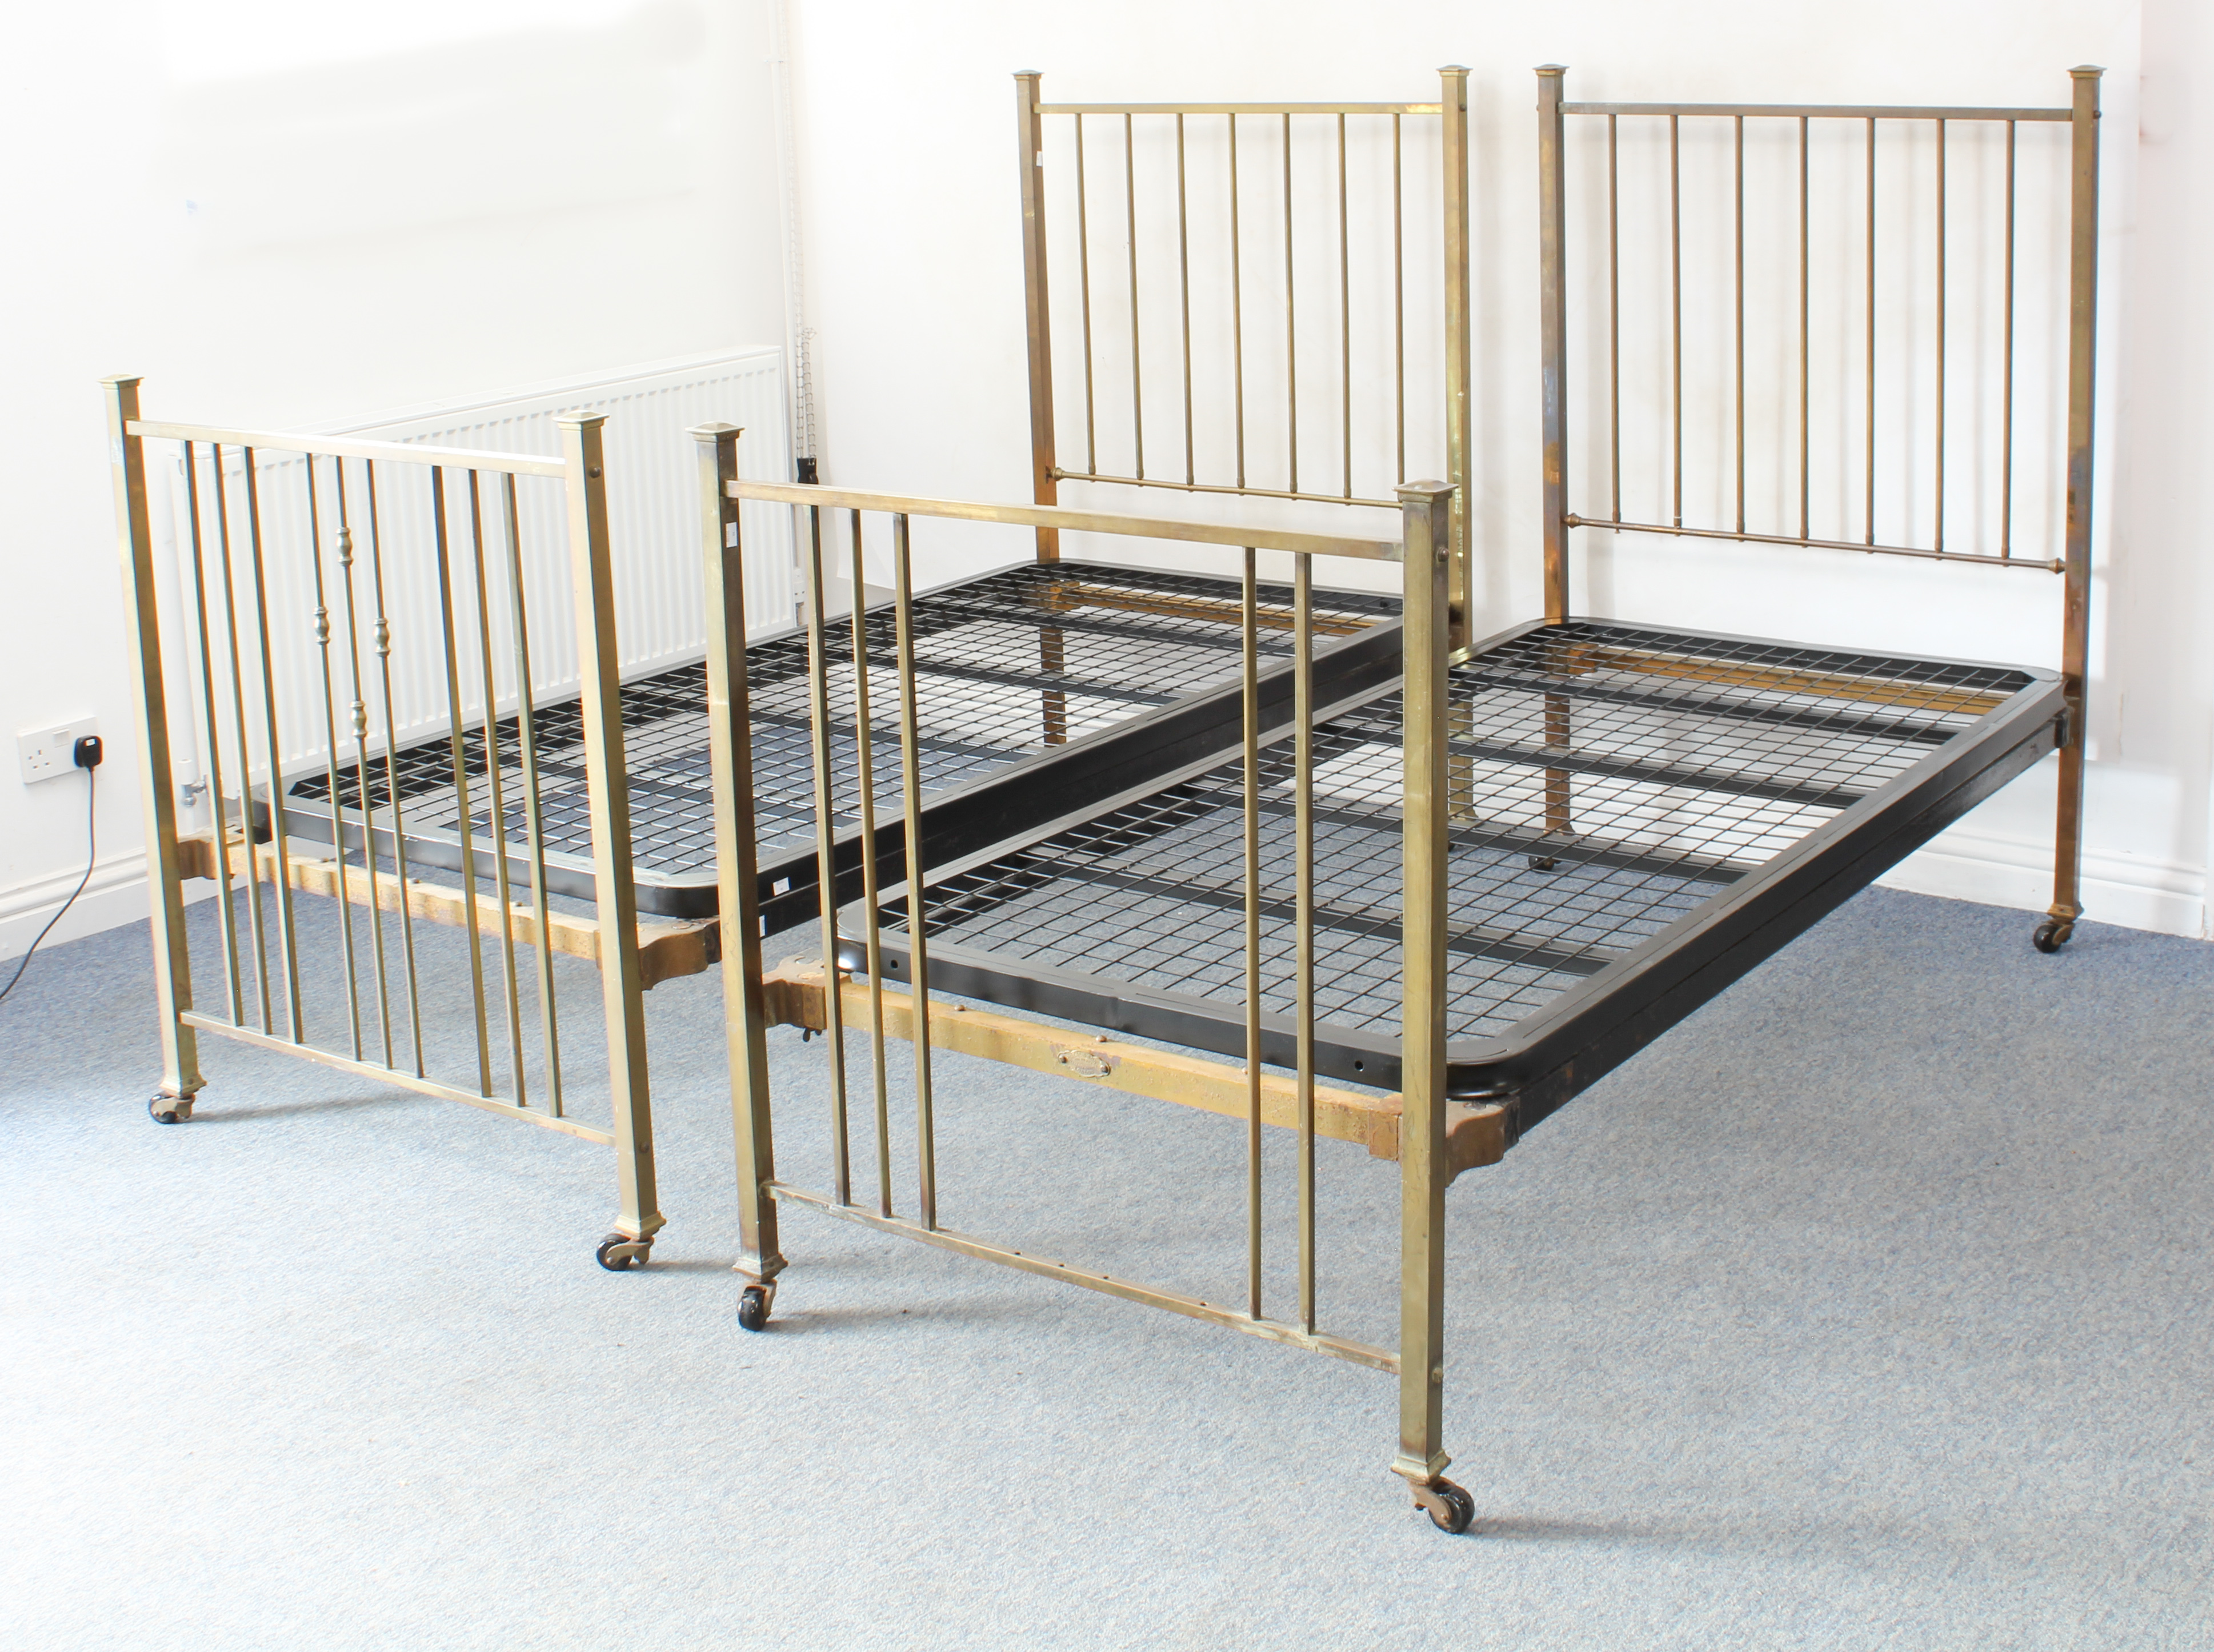 A pair of brass single beds by Heal & Sons (Heals) - 1920s-30s, the head and foot boards with square